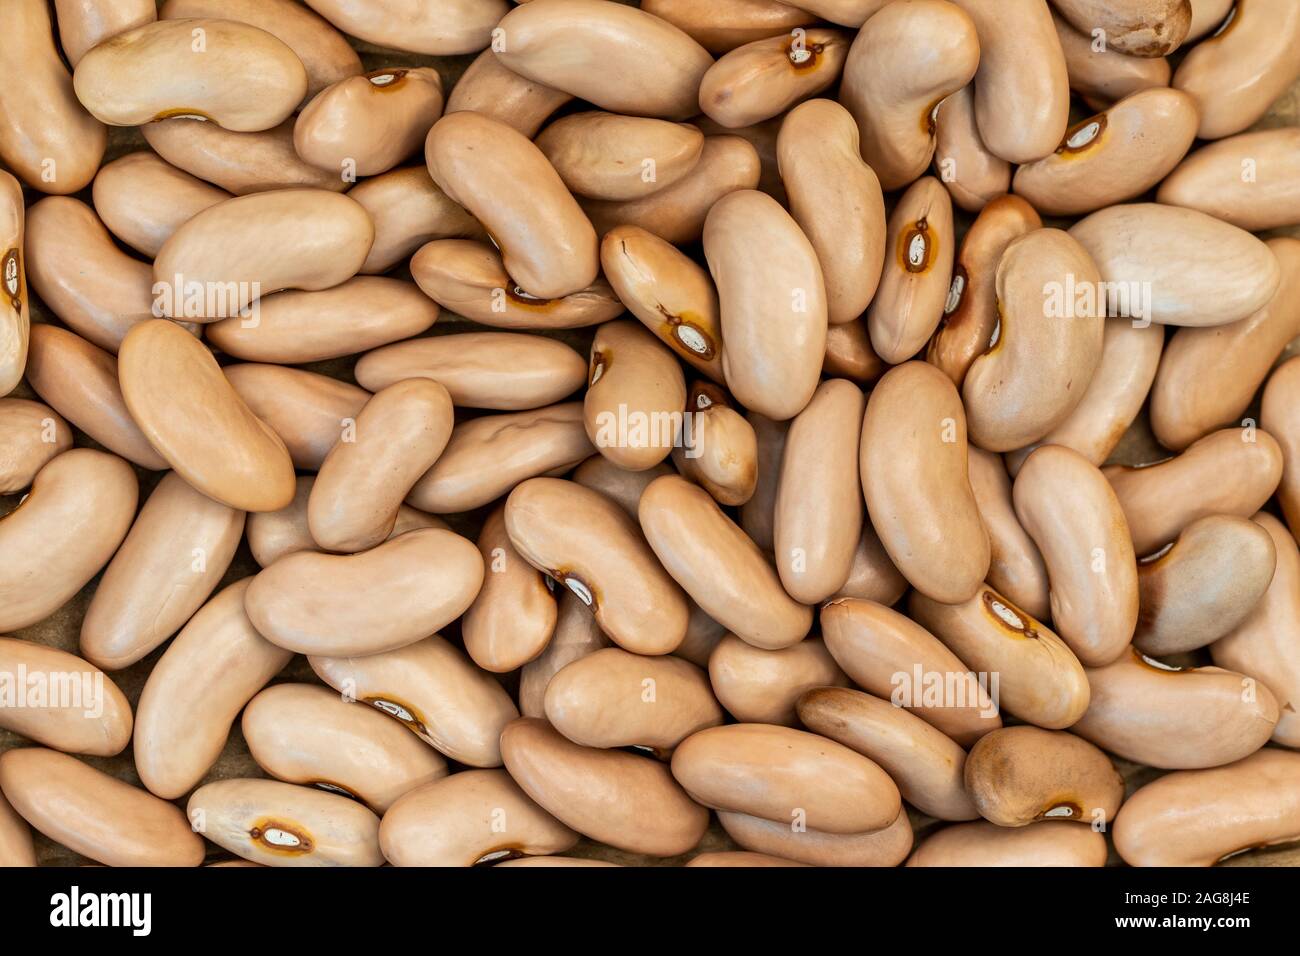 Close-up of brown beans or cinnamon beans. Spain Stock Photo